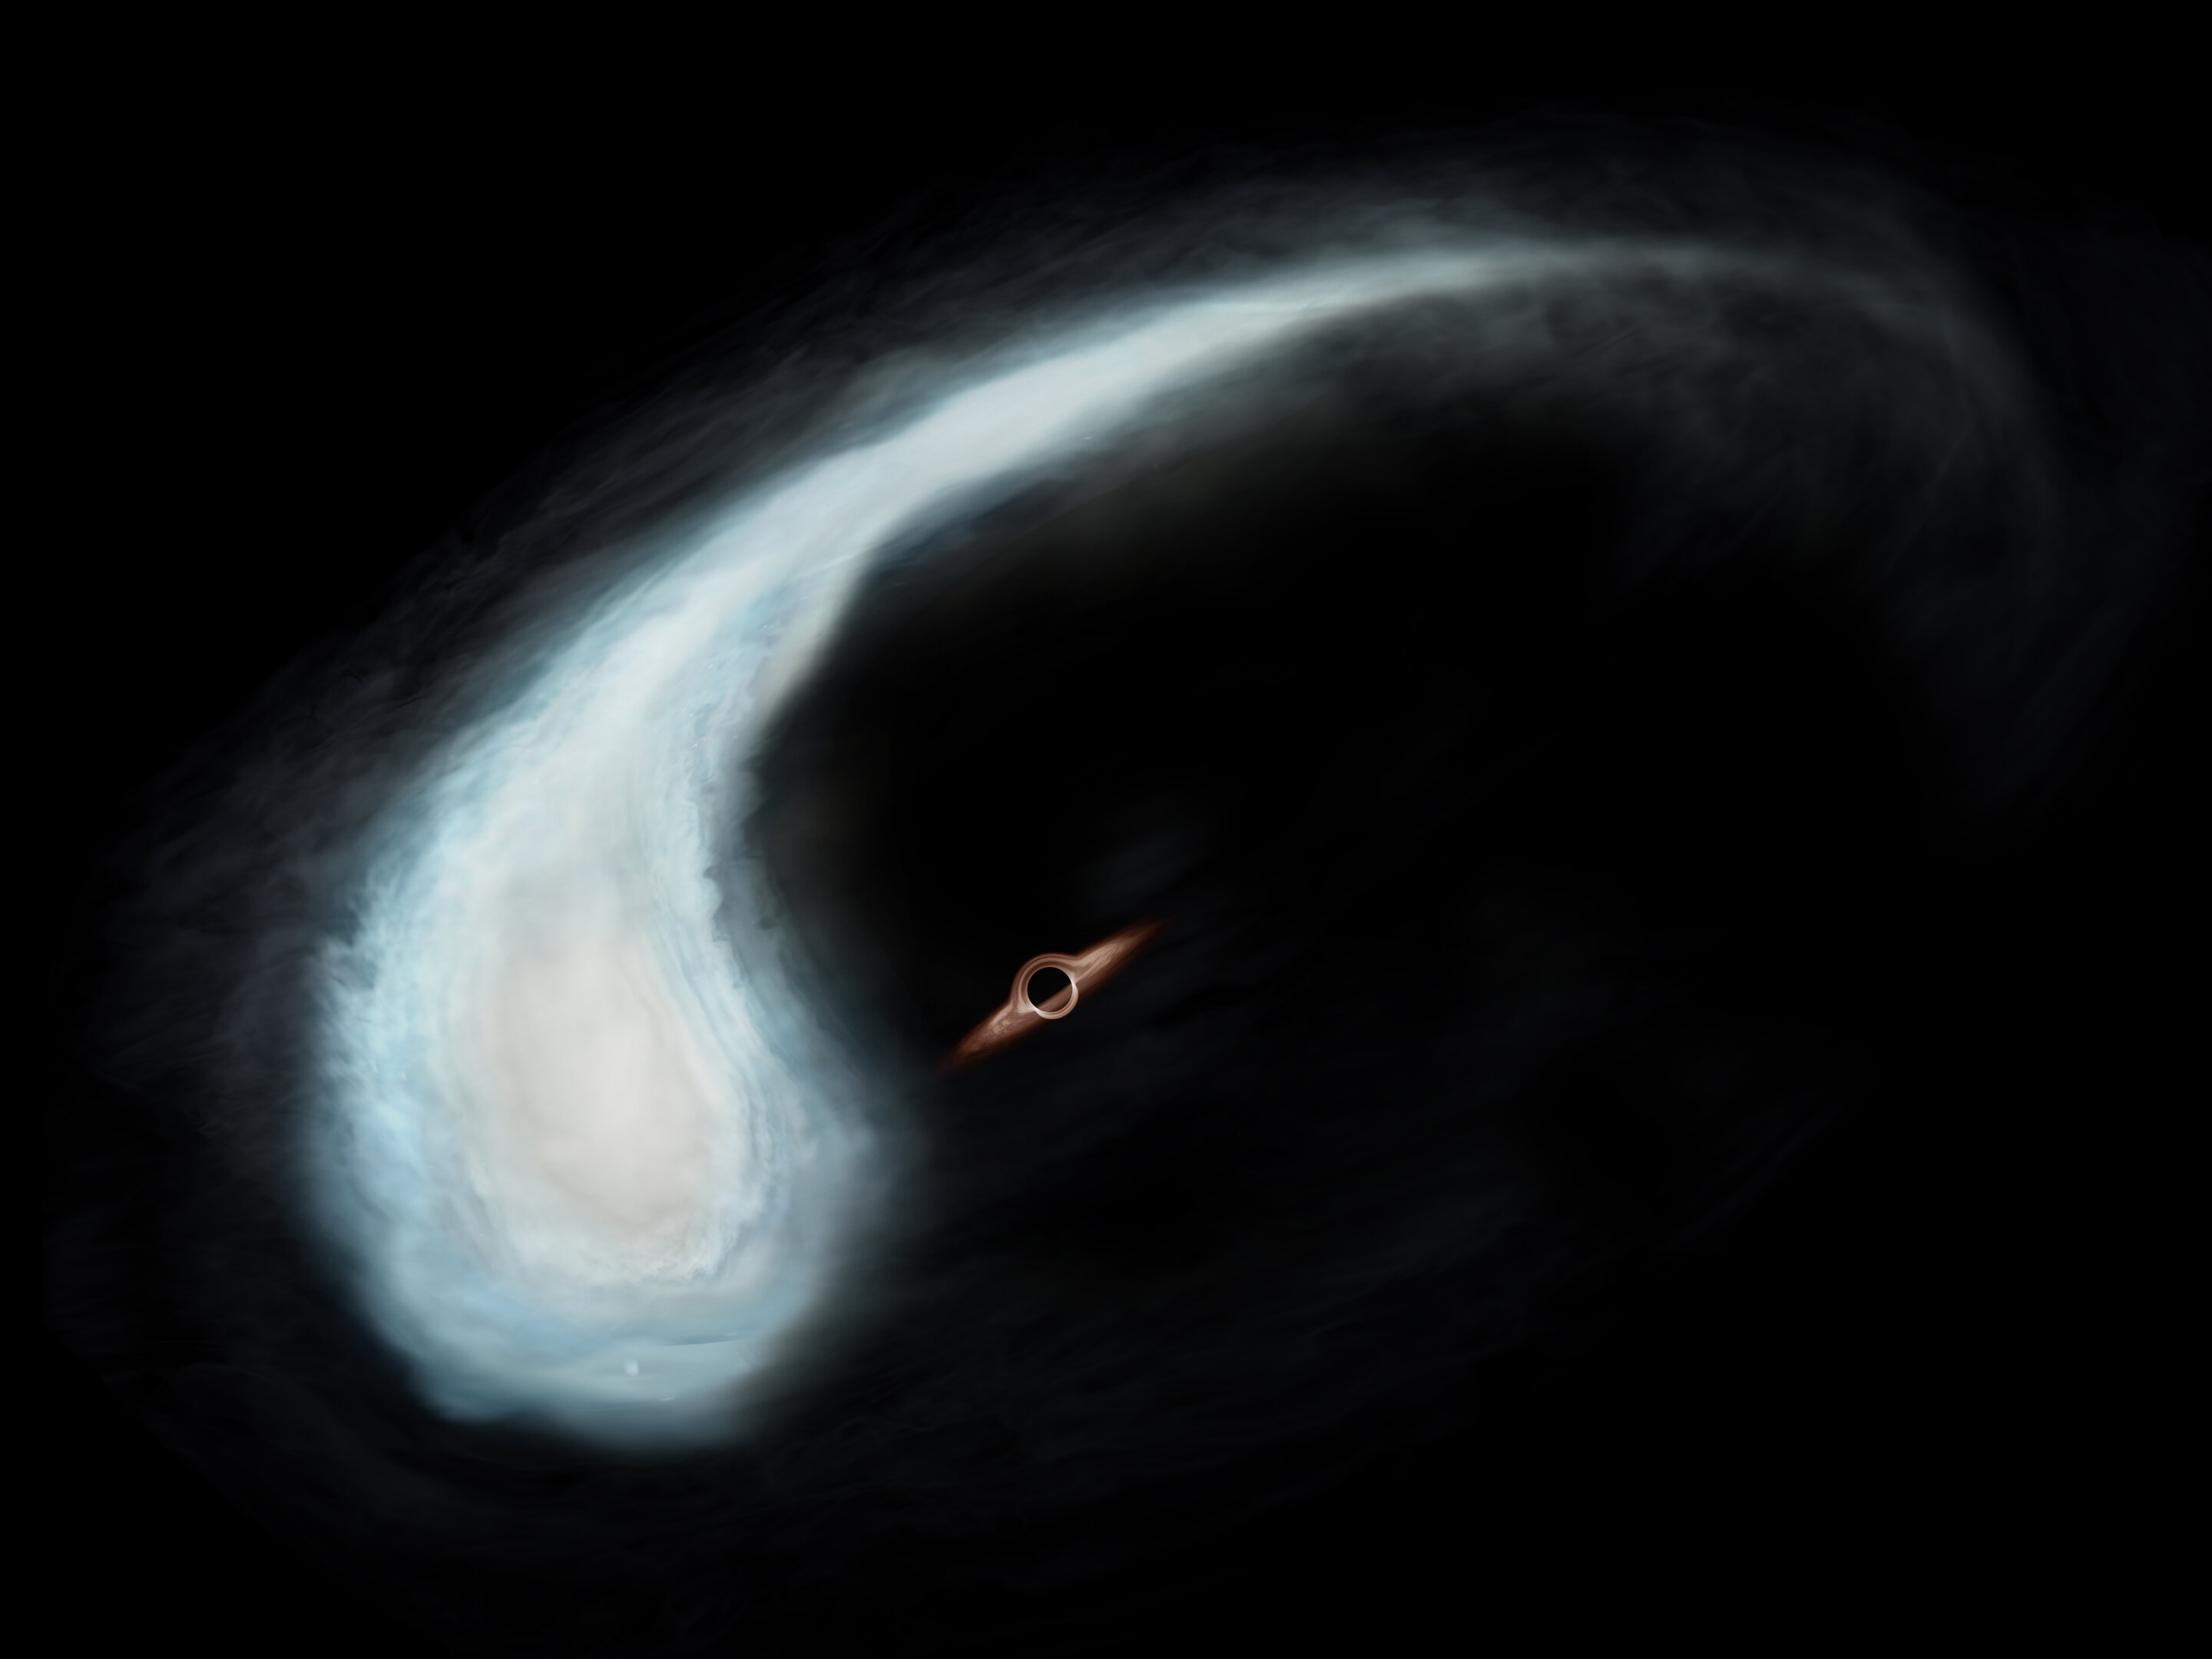 Tadpole' molecular cloud appears to be playing around black hole